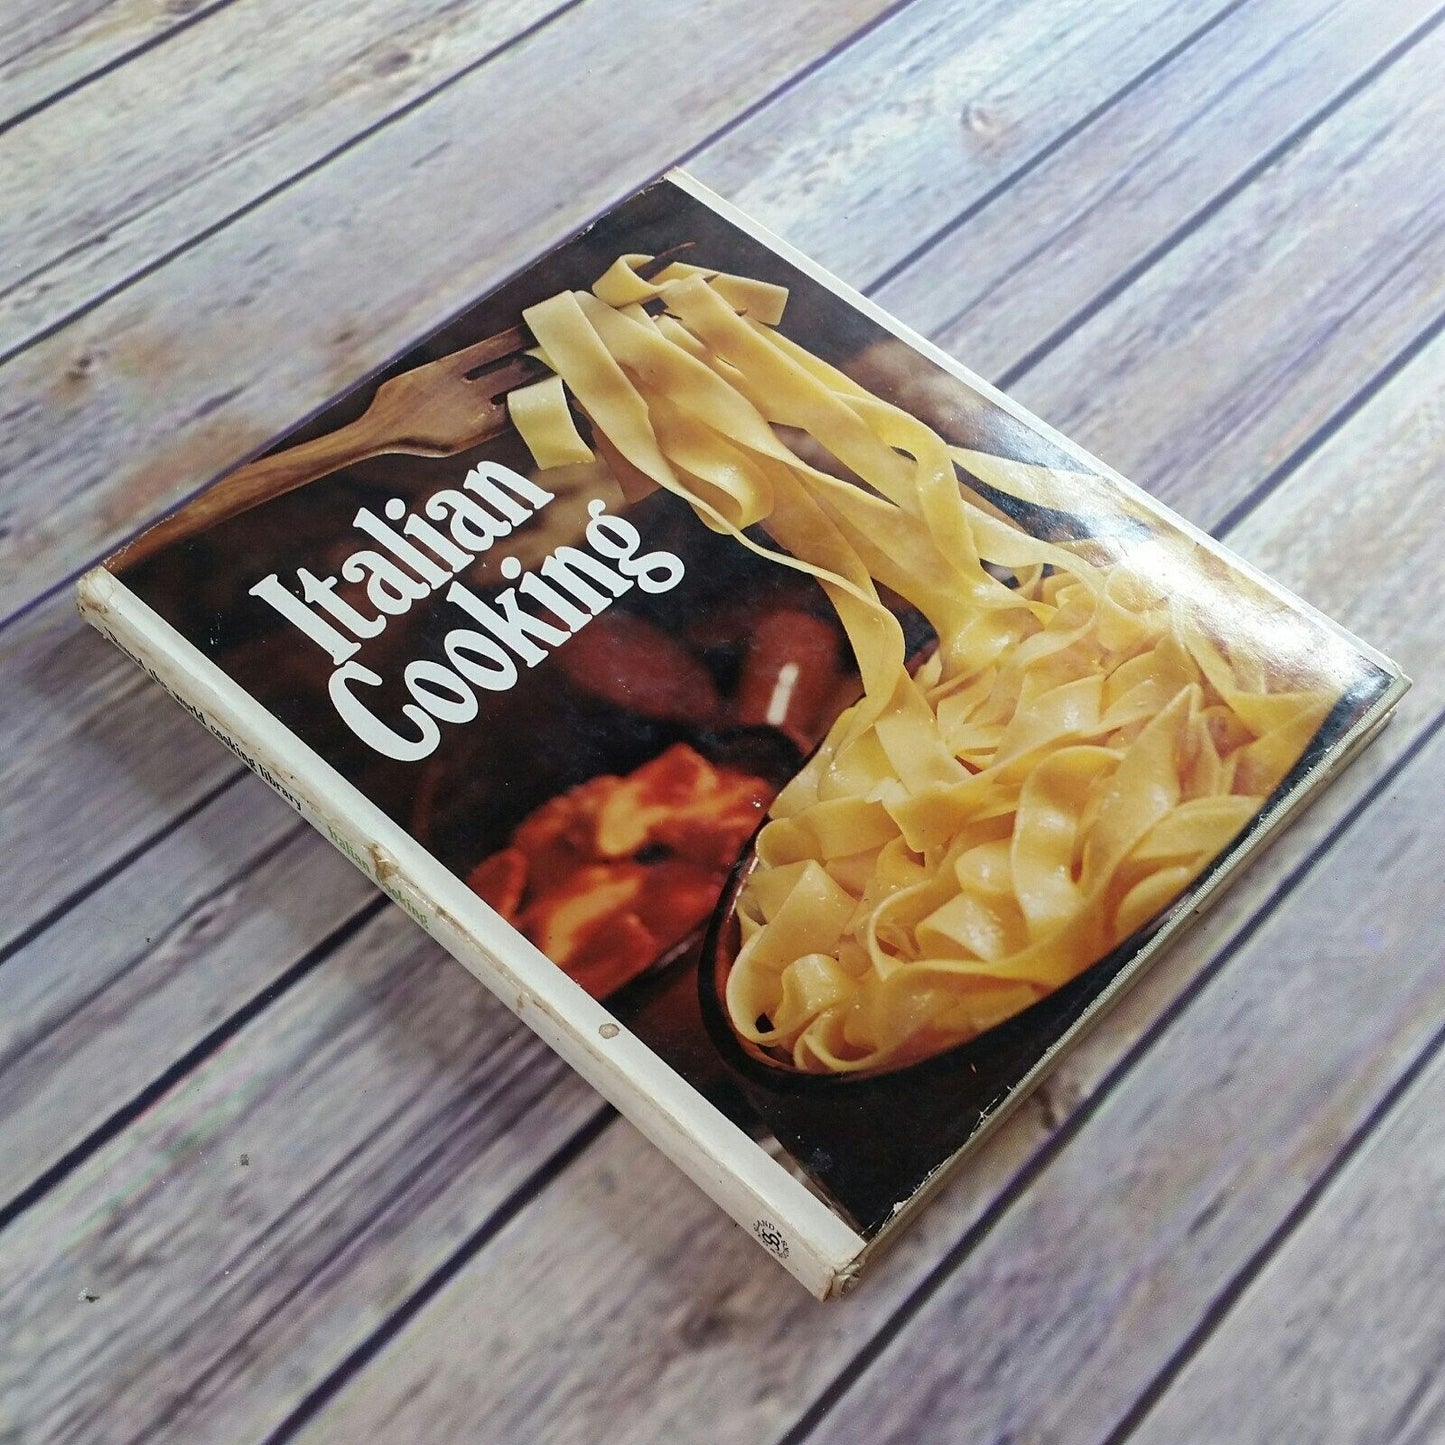 Vintage Italian Cookbook Italian Cooking Recipes Luisa de Ruggieri 1973 Hardcover WITH Dust Jacket Round the World Cooking Libray